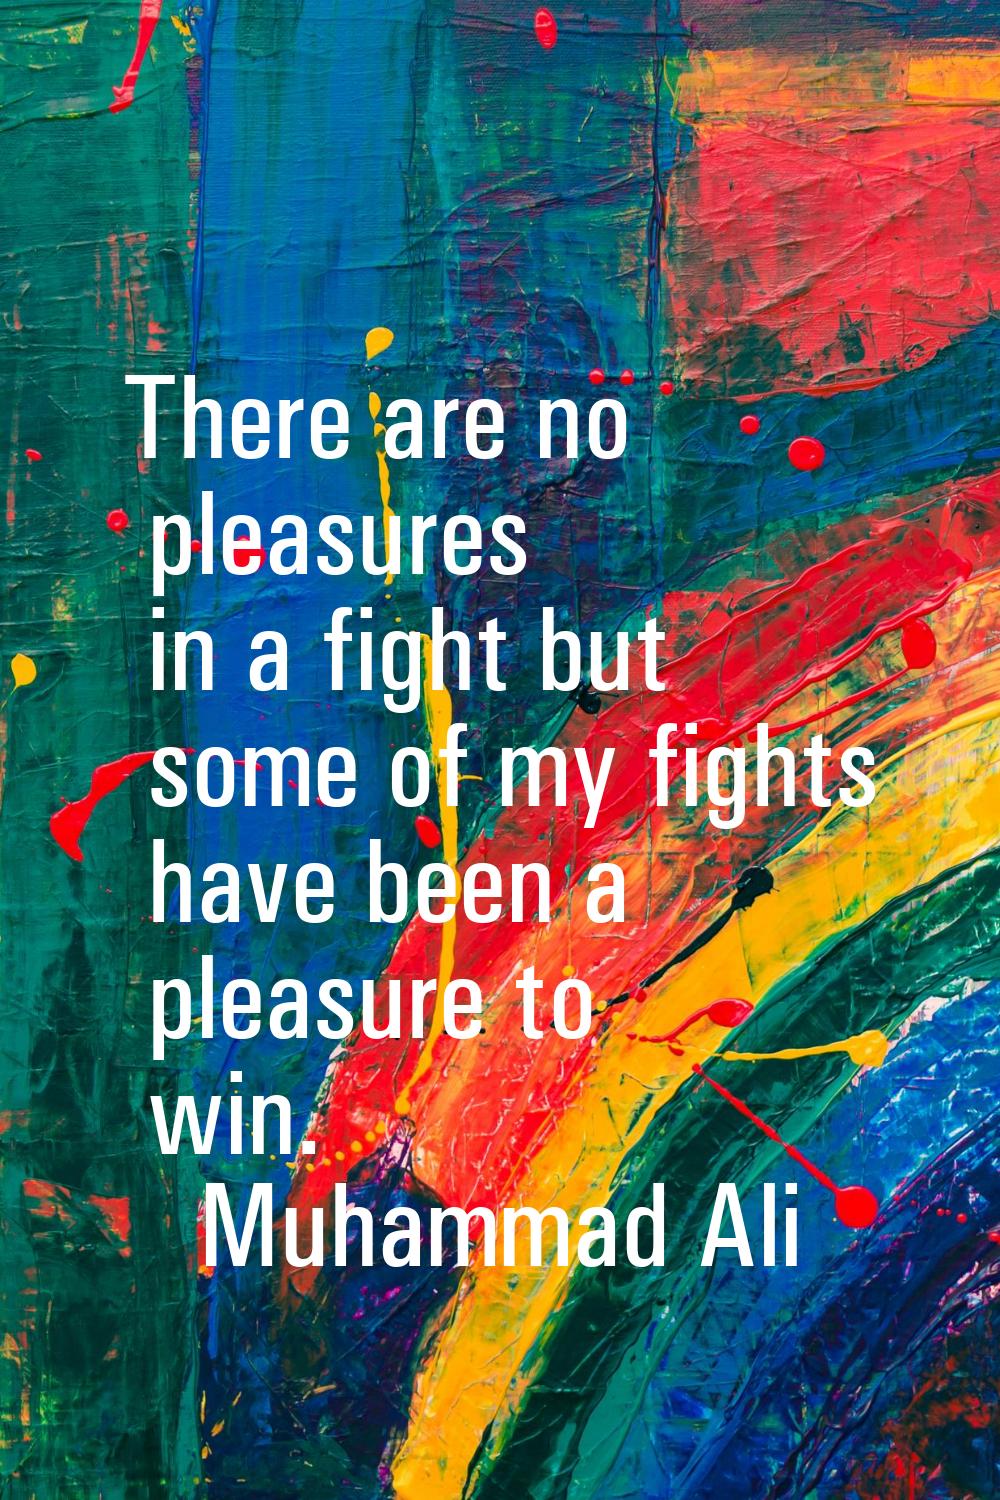 There are no pleasures in a fight but some of my fights have been a pleasure to win.